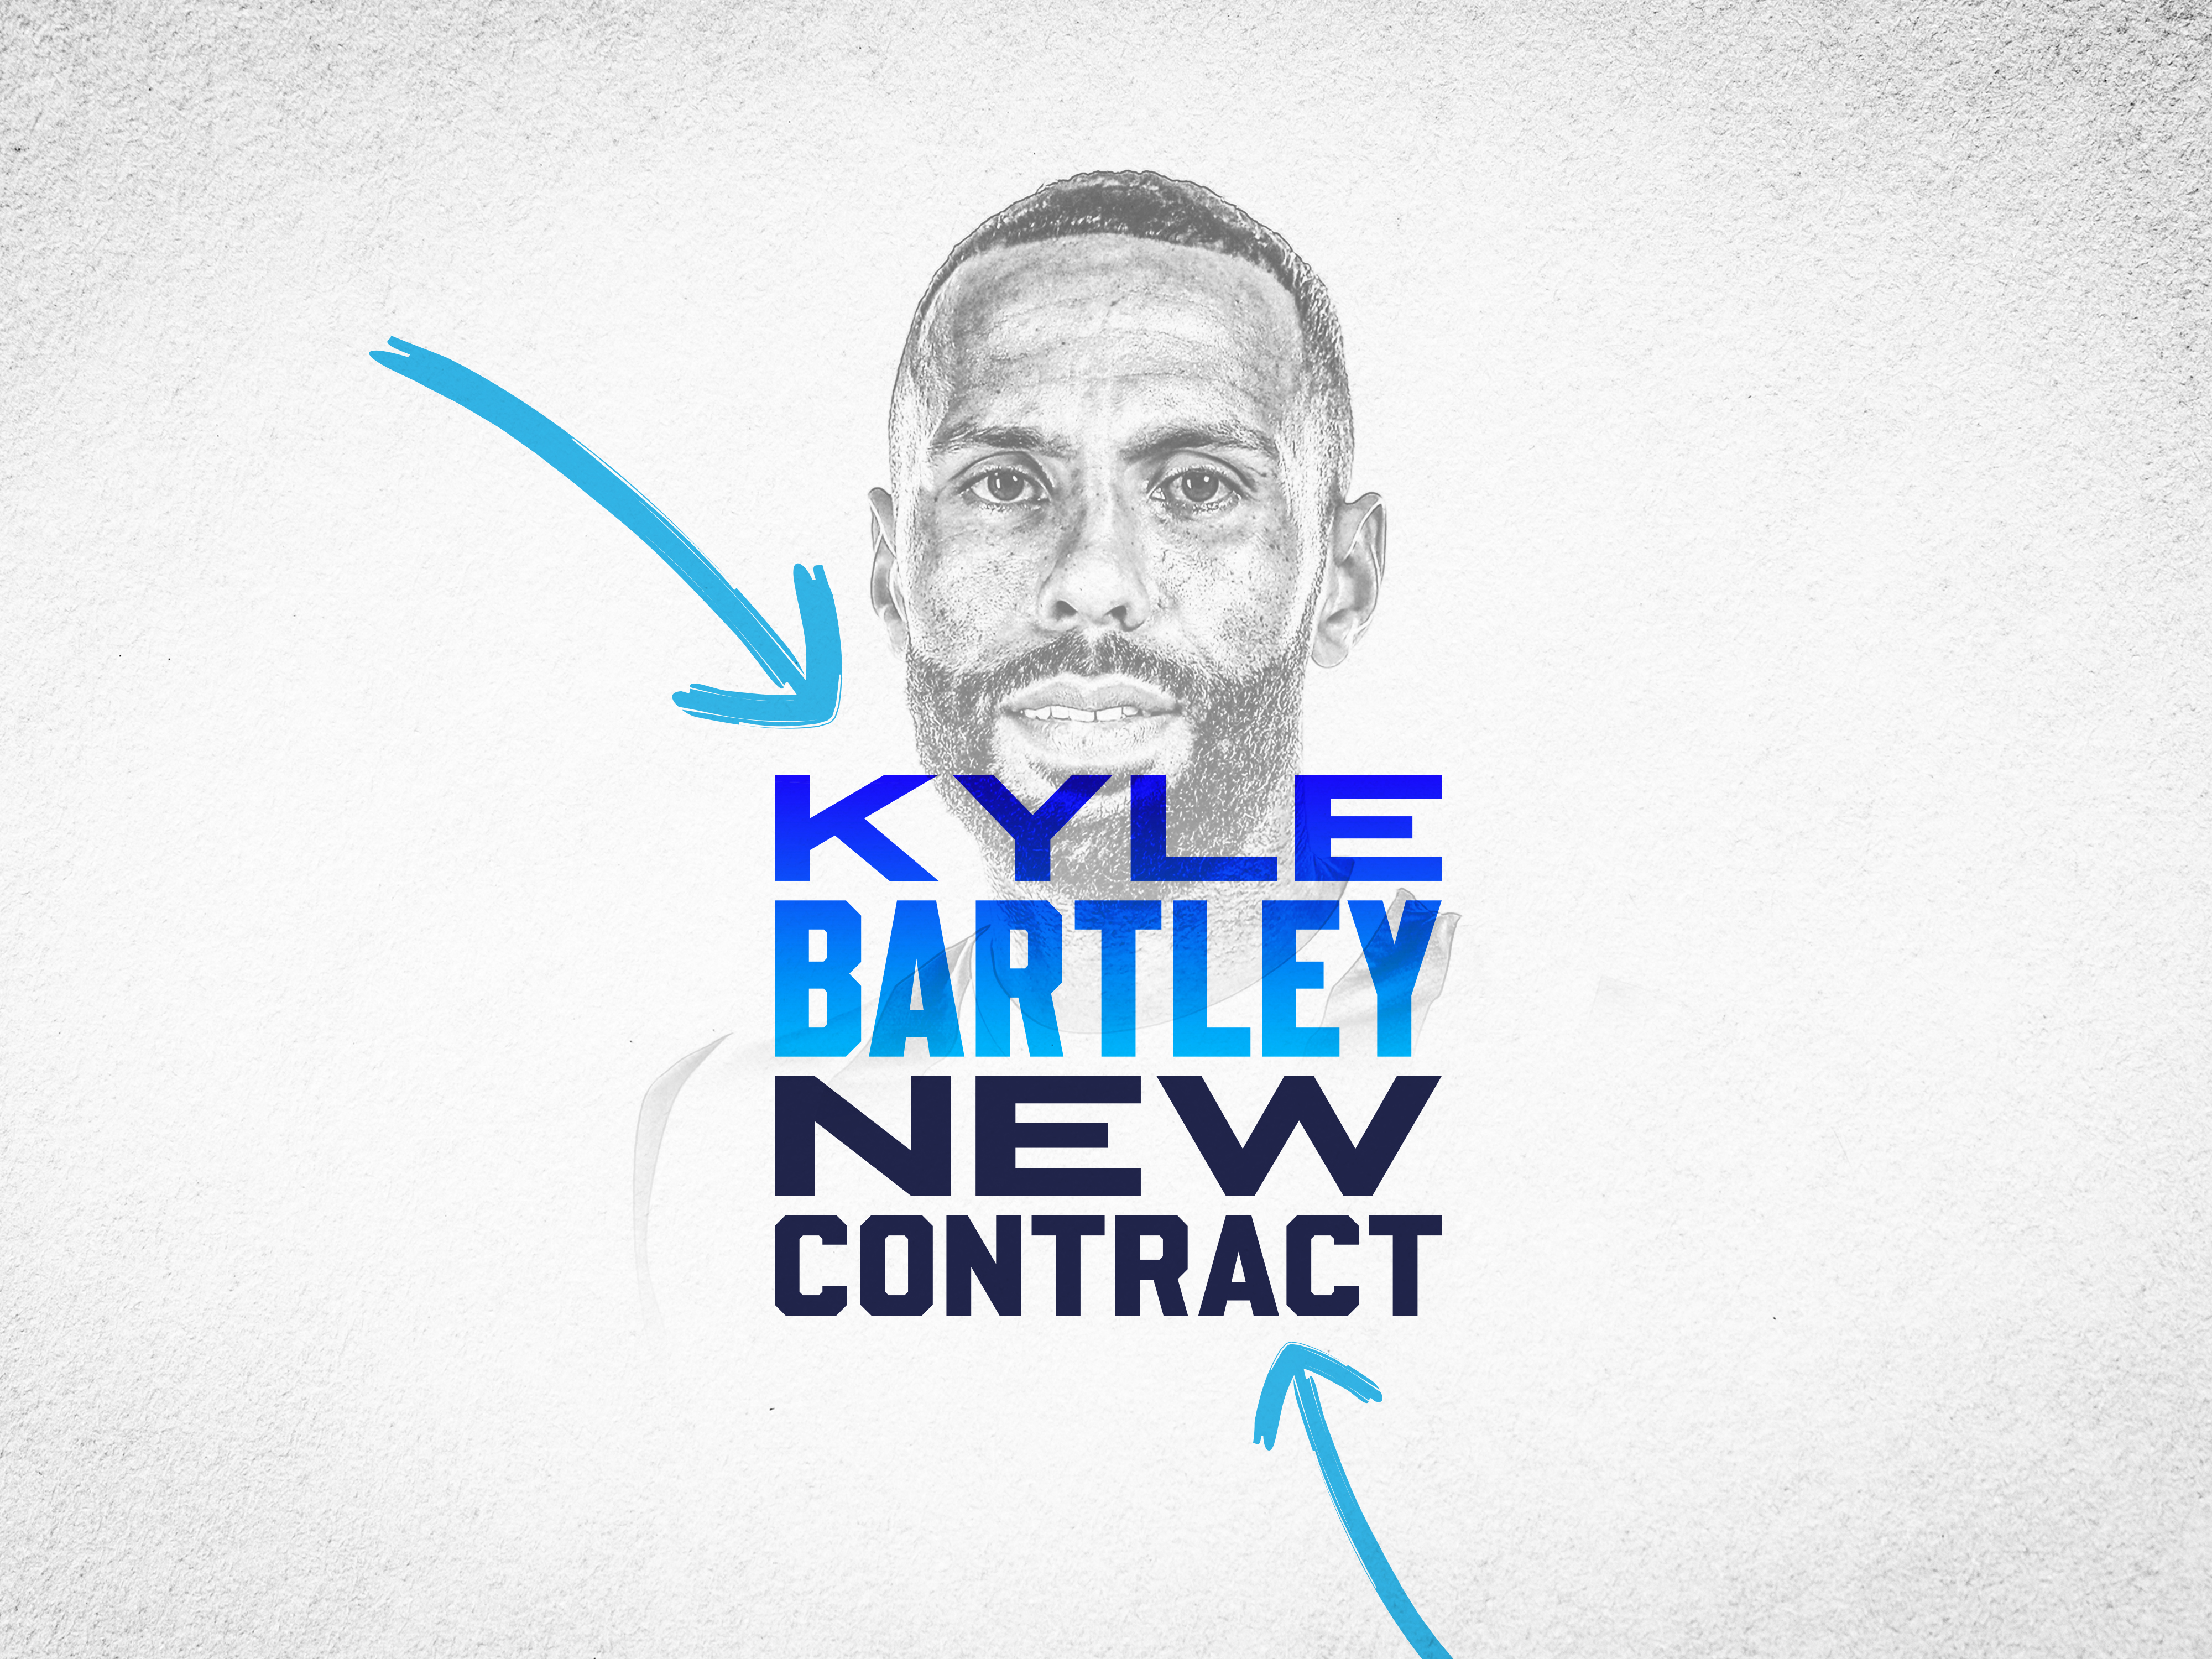 Kyle Bartley new contract graphic